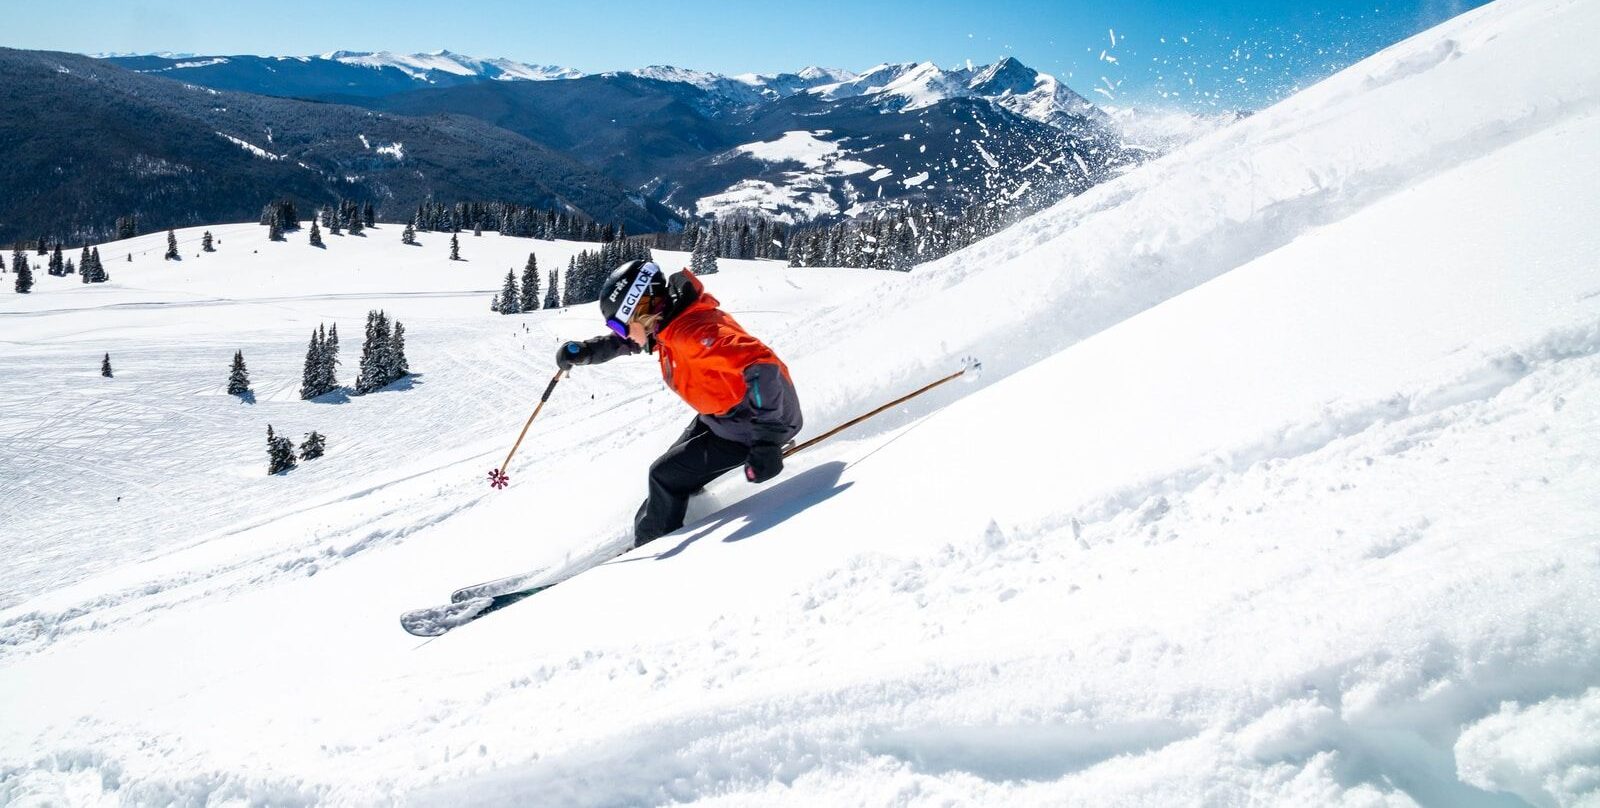 person in orange jacket and black pants riding ski blades on snow covered mountain during daytime